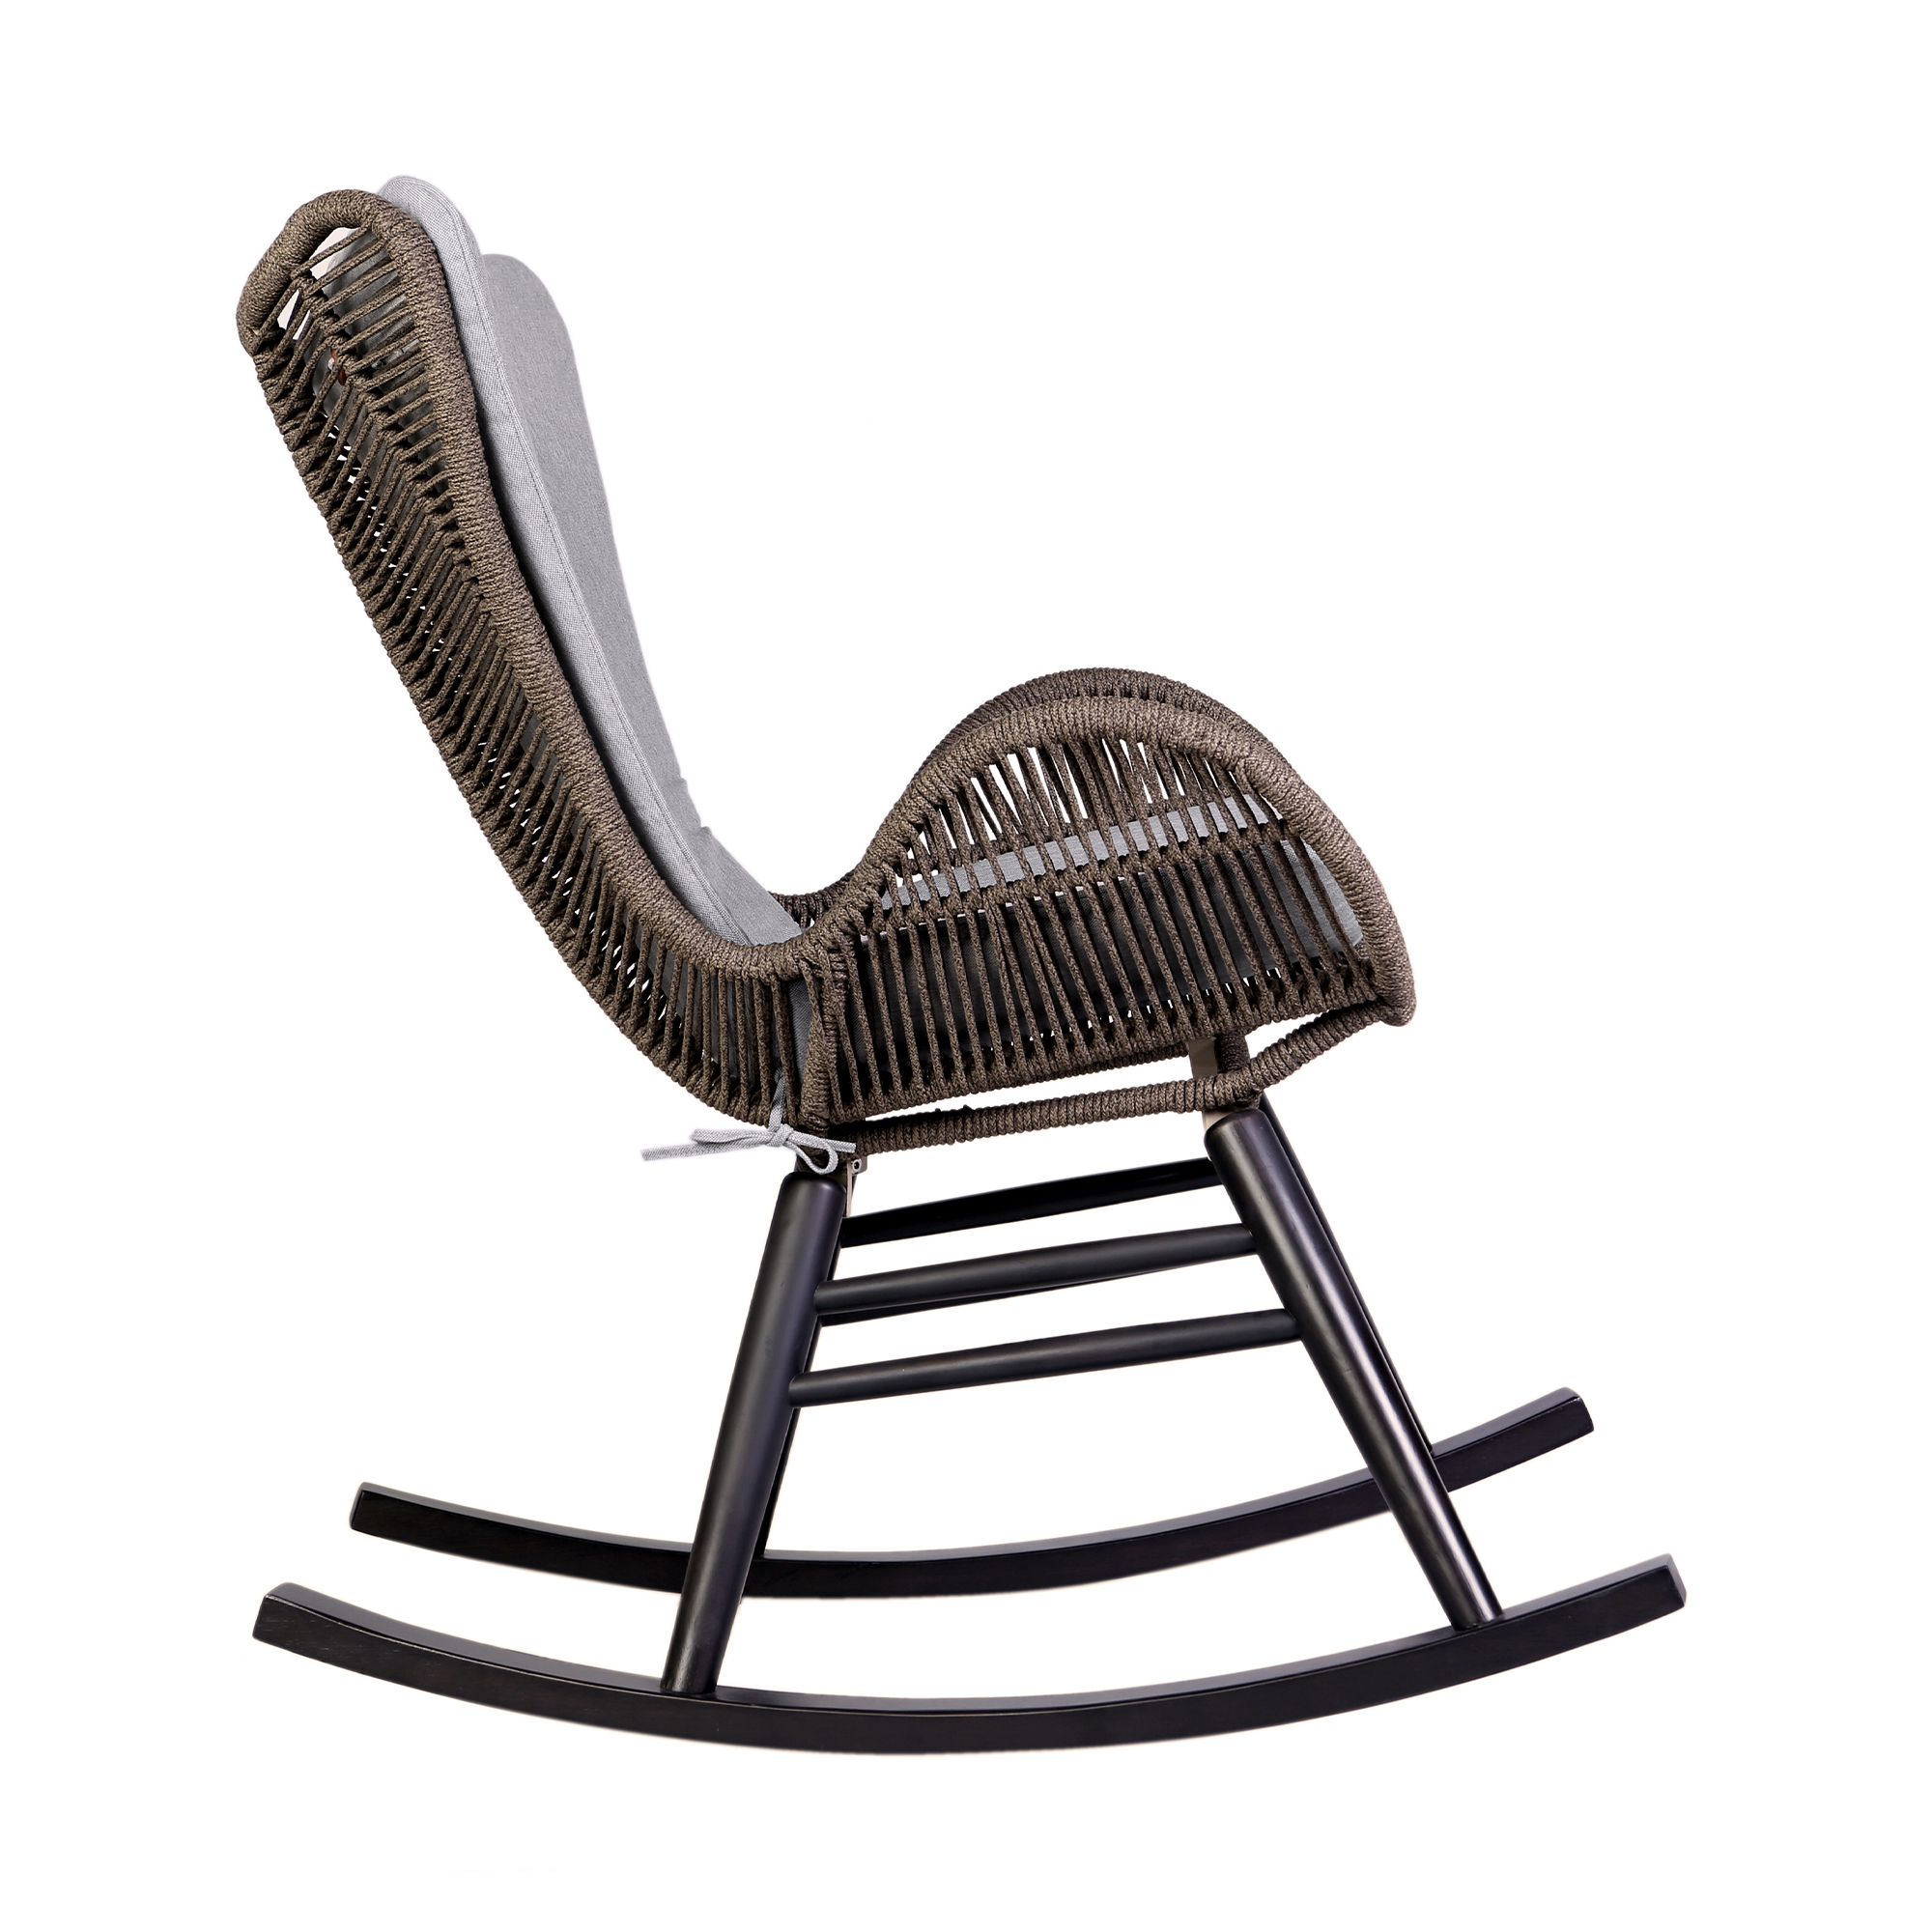 Fanny Outdoor Patio Rocking chair in Dark Eucalyptus Wood and Truffle Rope - image 4 of 12